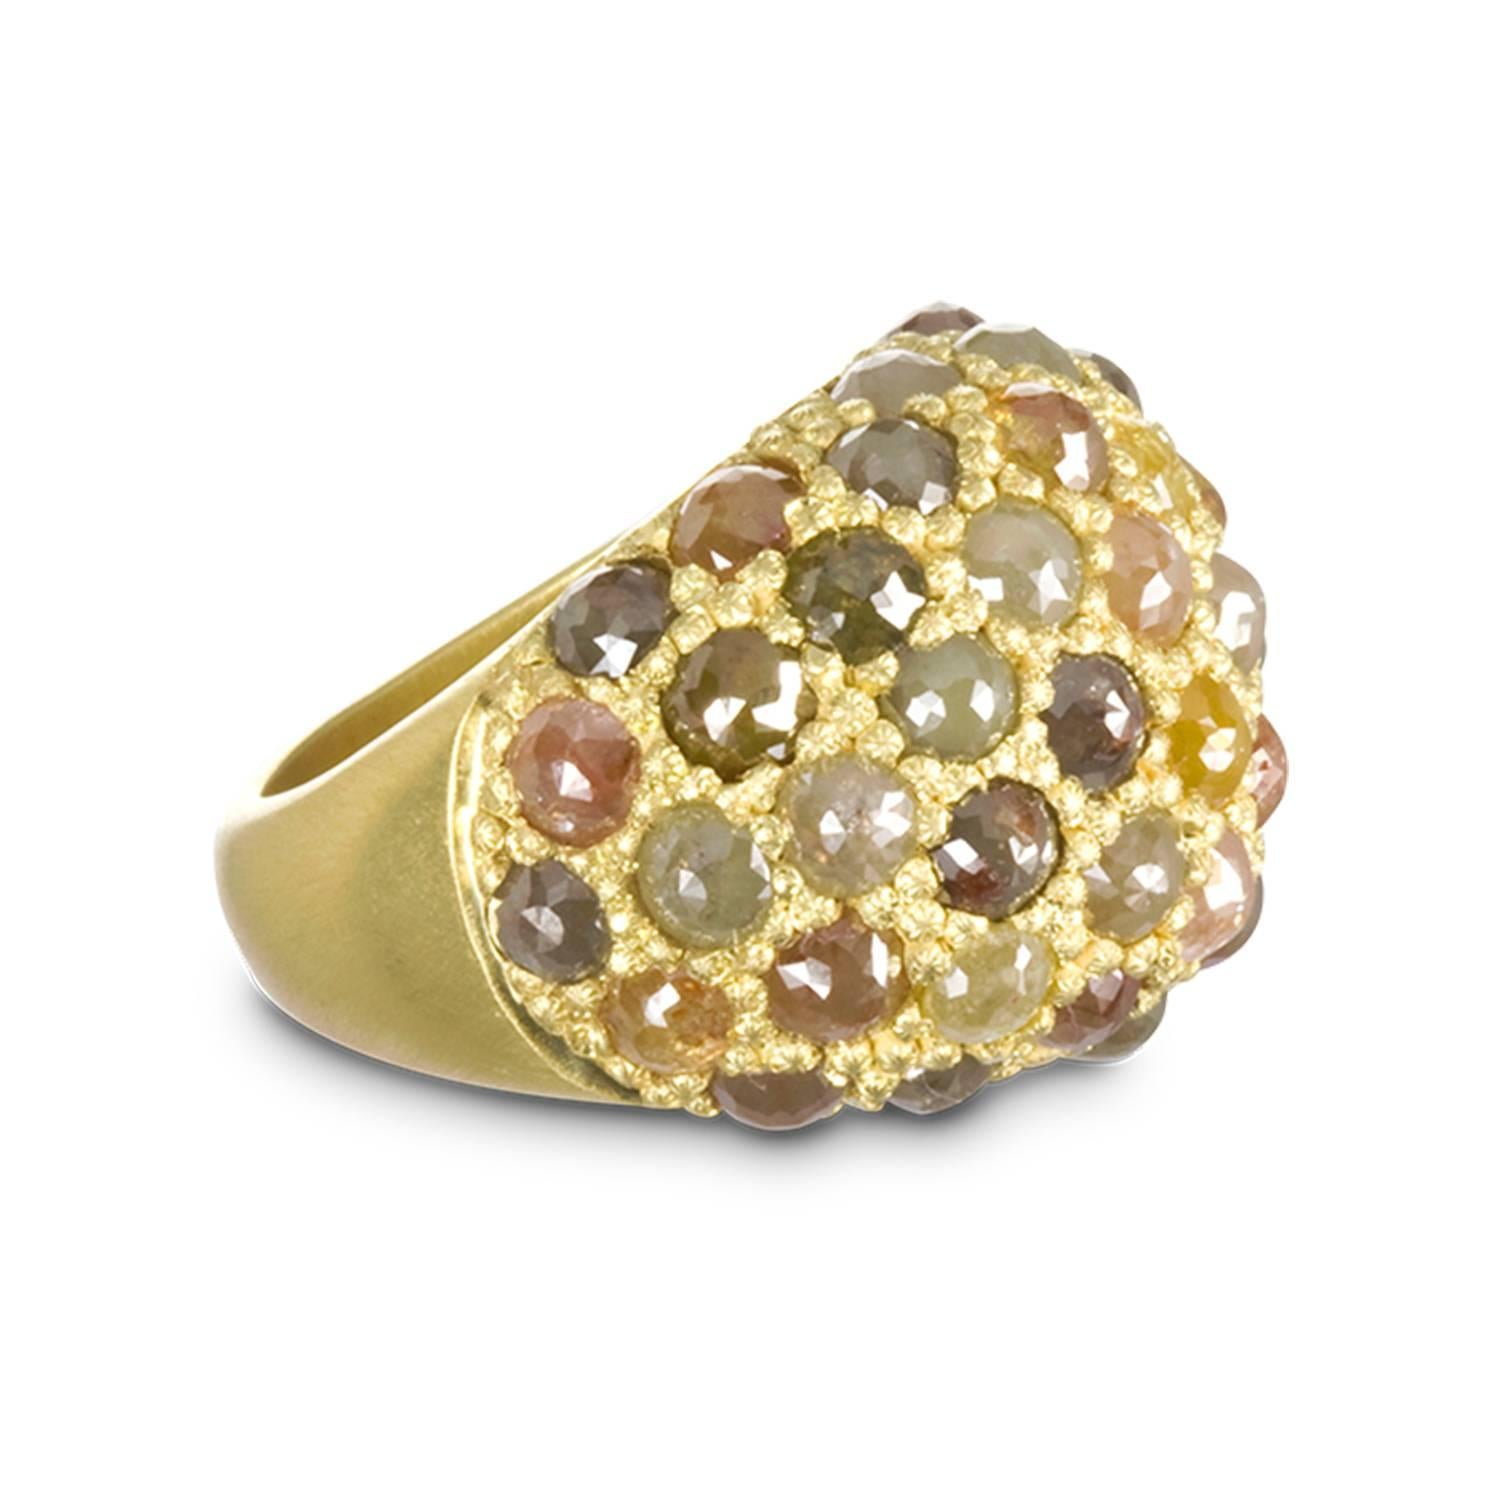 Rich in color, texture, and substance, this is the quintessential statement ring.  Meticulously handcrafted in 18k green*gold, each rose cut milky diamond is pave-set to create a dome ring that defines subtle sophistication and style for the modern